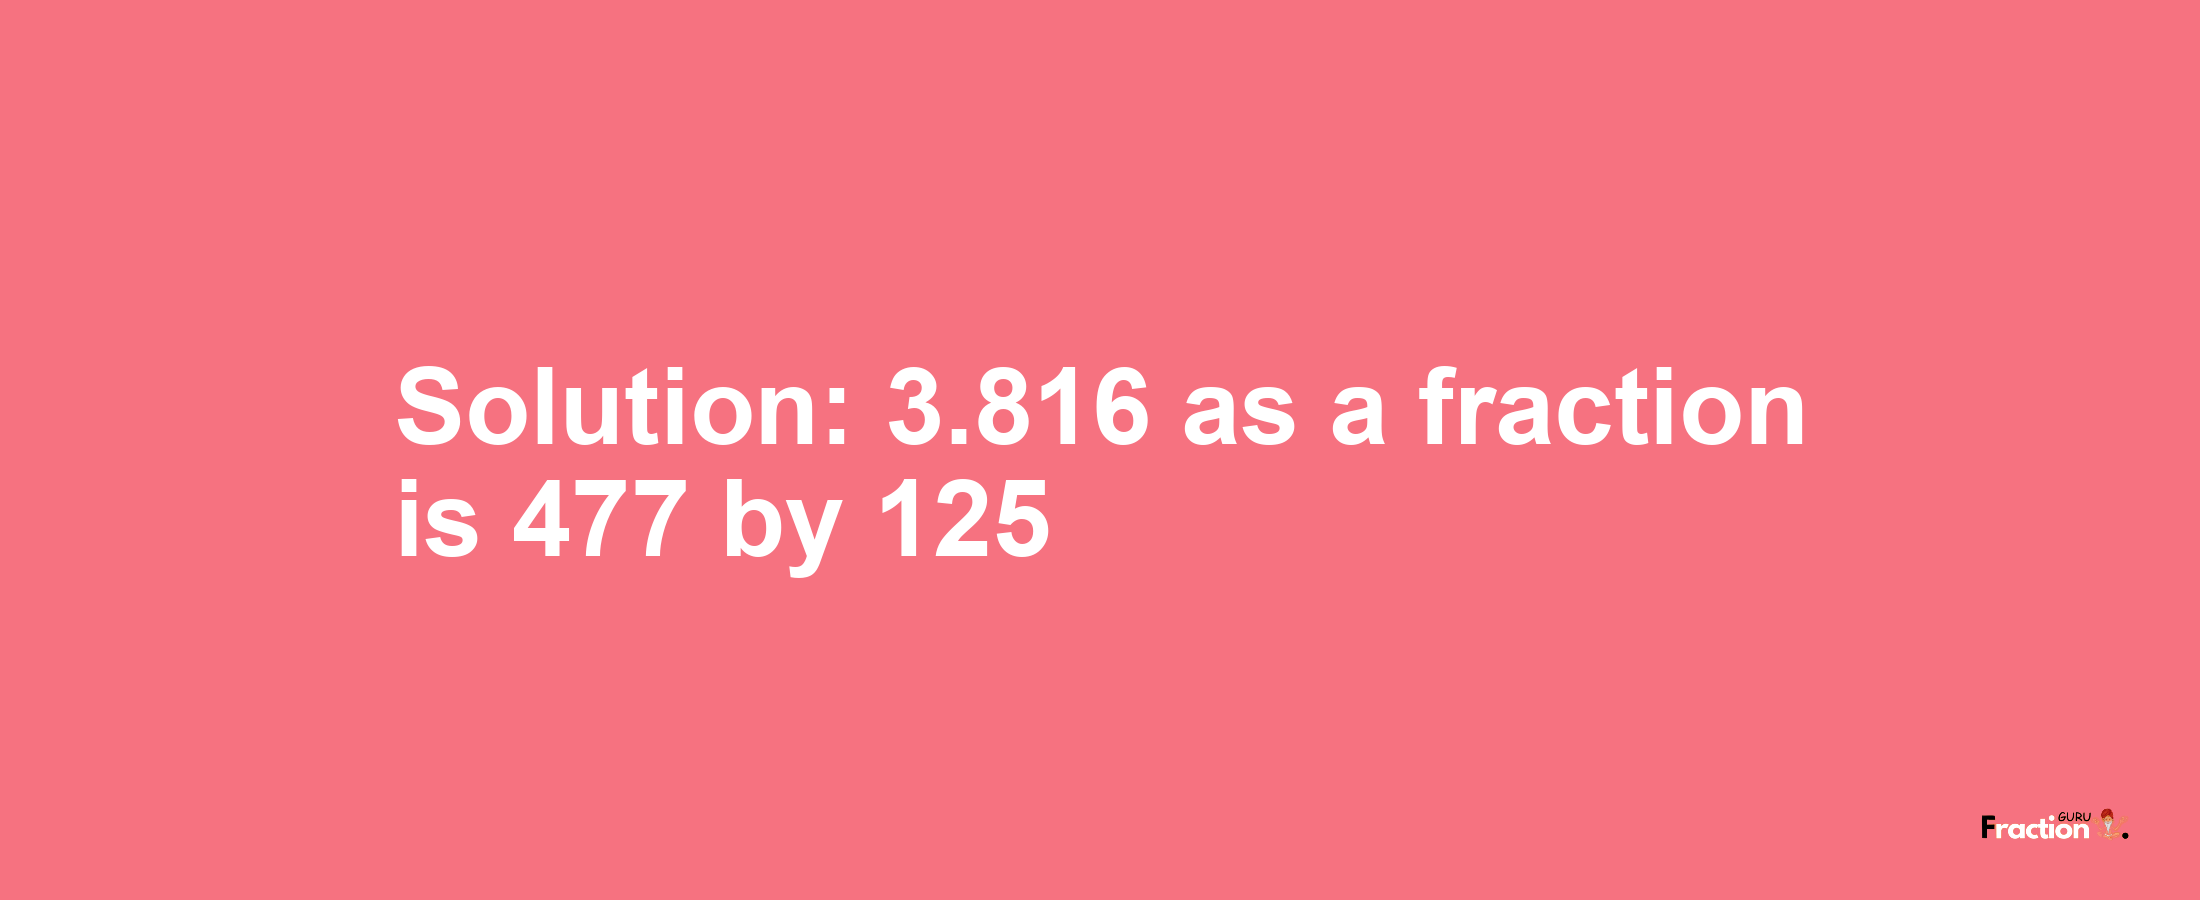 Solution:3.816 as a fraction is 477/125